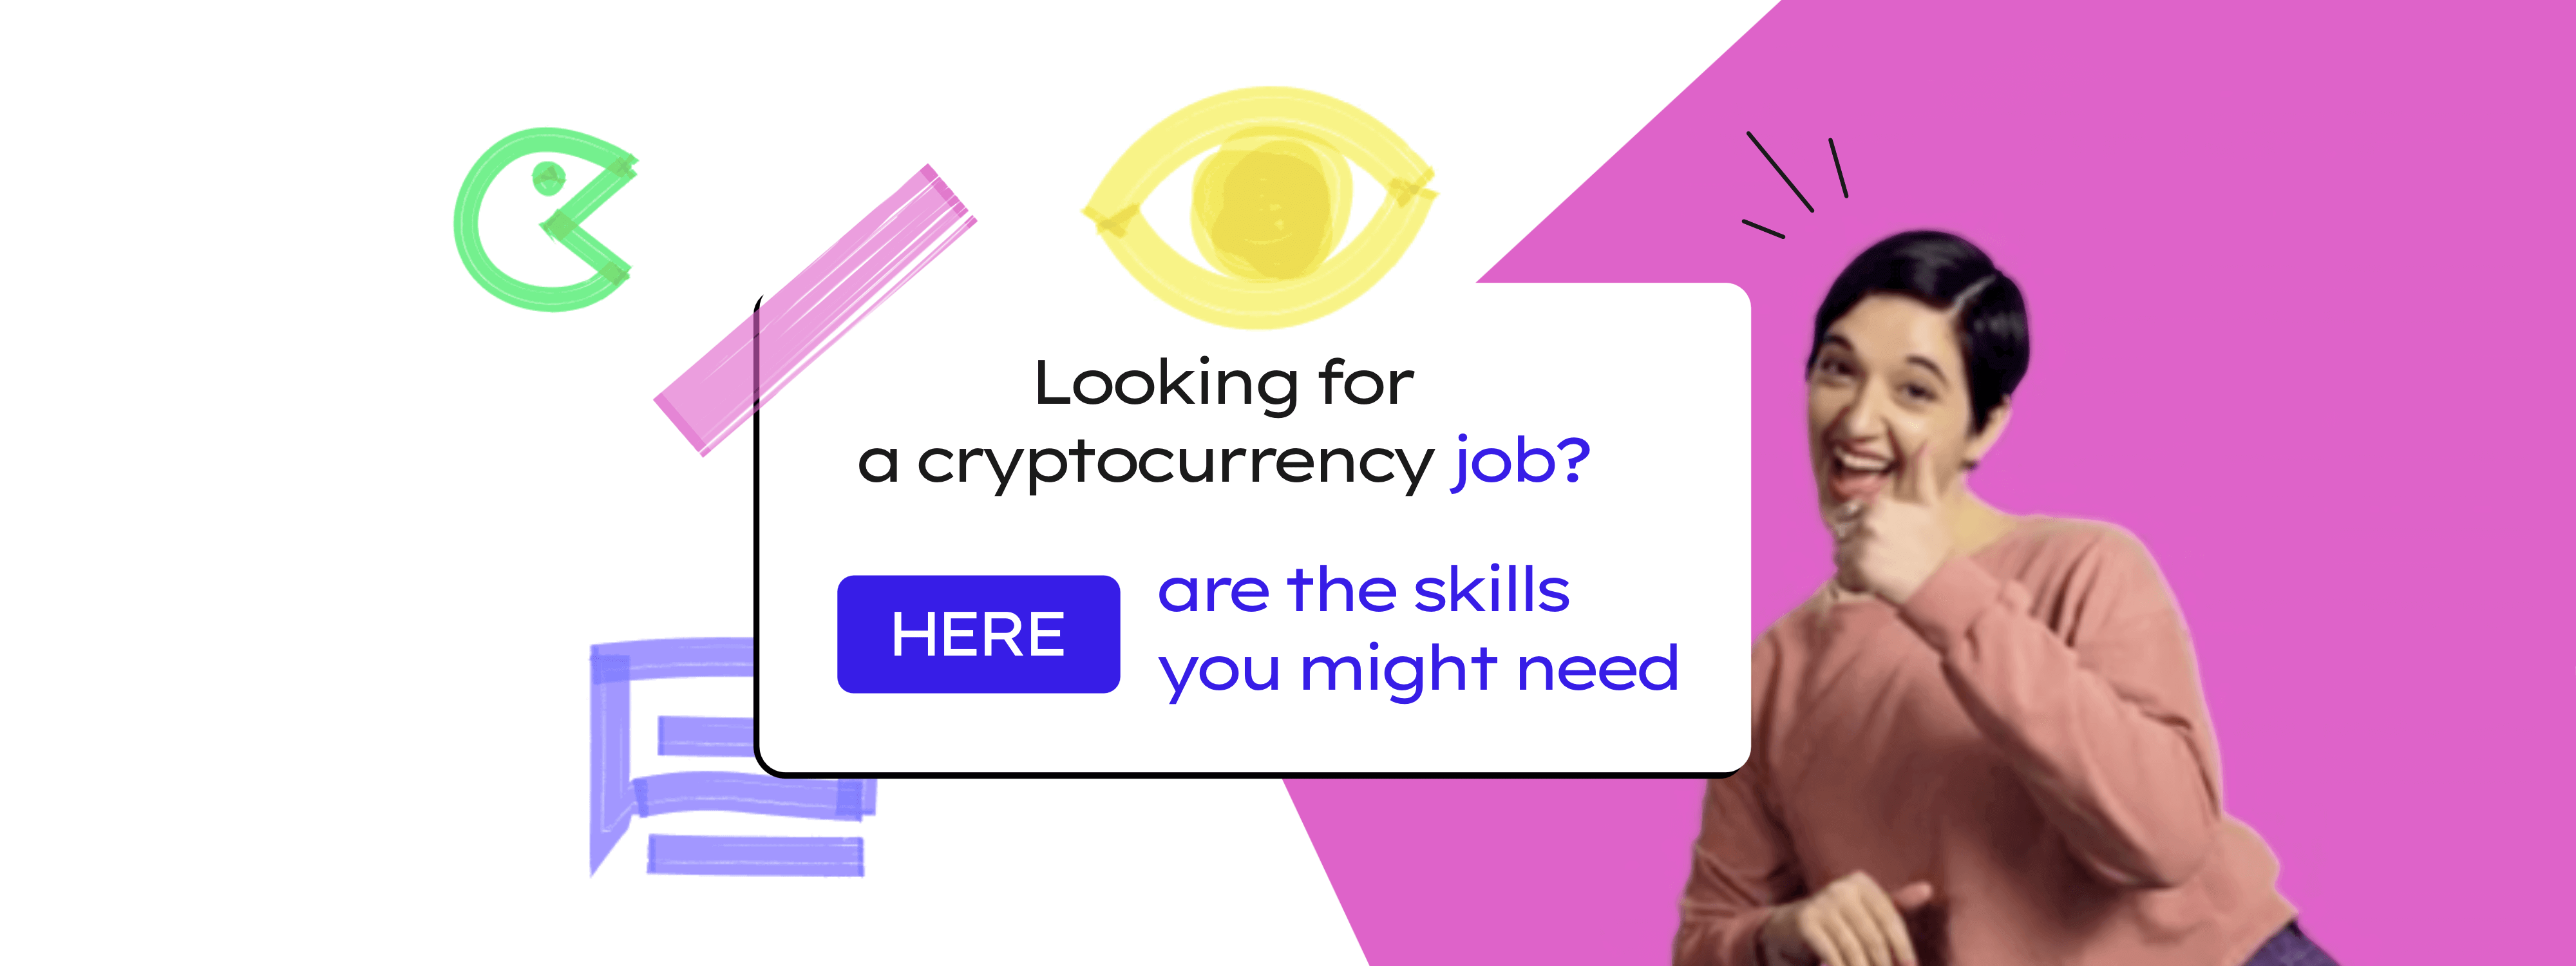 Looking for a cryptocurrency job? Here are the skills you might need